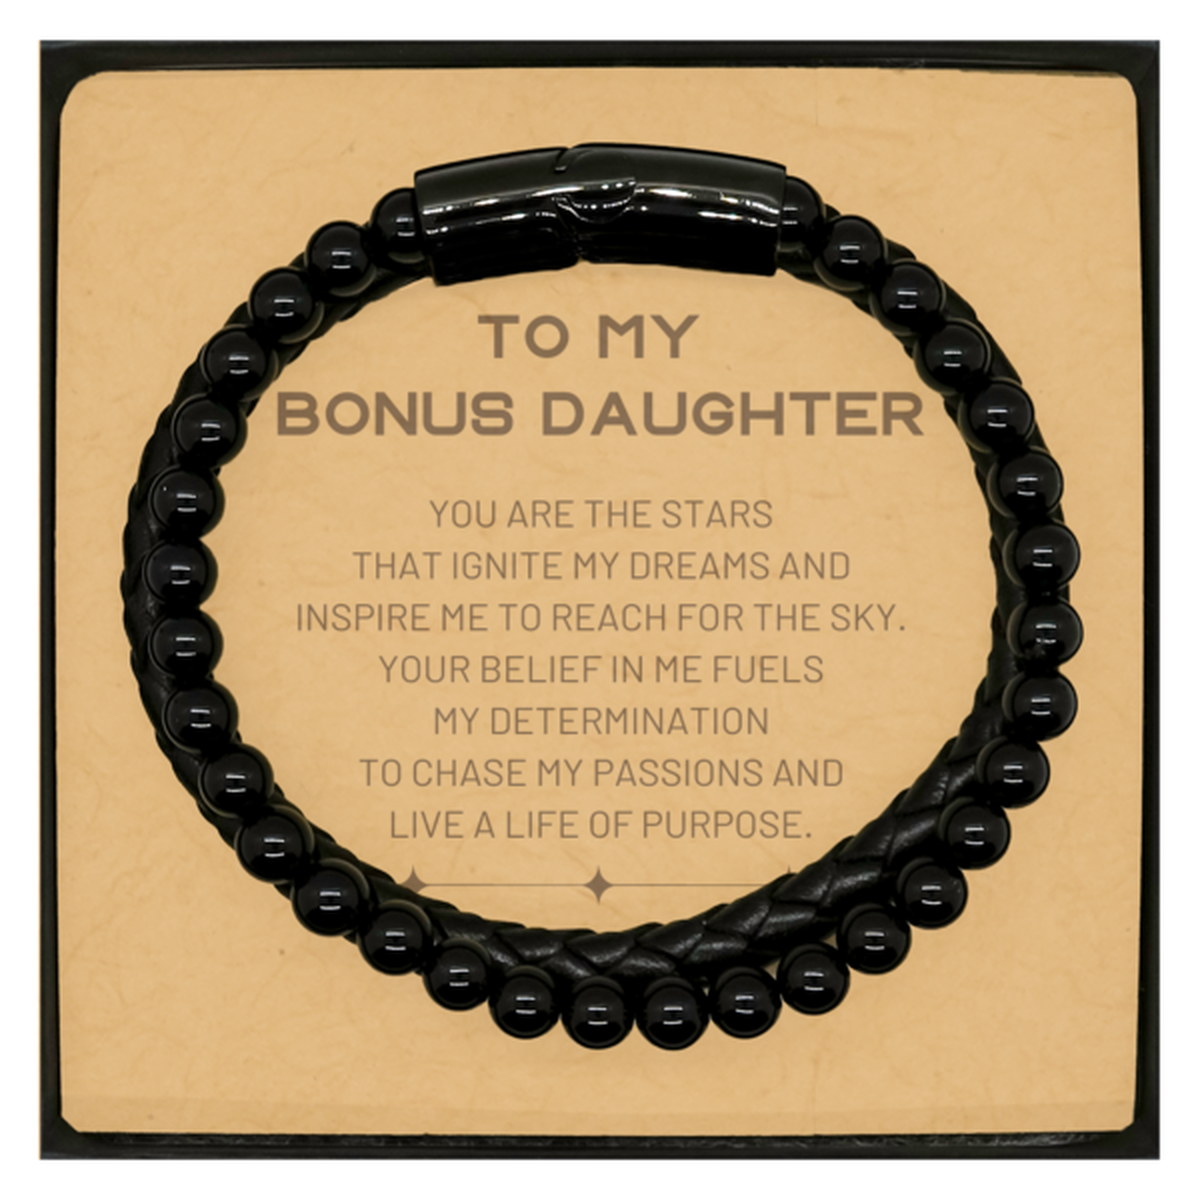 To My Bonus Daughter Stone Leather Bracelets, You are the stars that ignite my dreams and inspire me to reach for the sky, Birthday Christmas Unique Gifts For Bonus Daughter, Thank You Gifts For Bonus Daughter